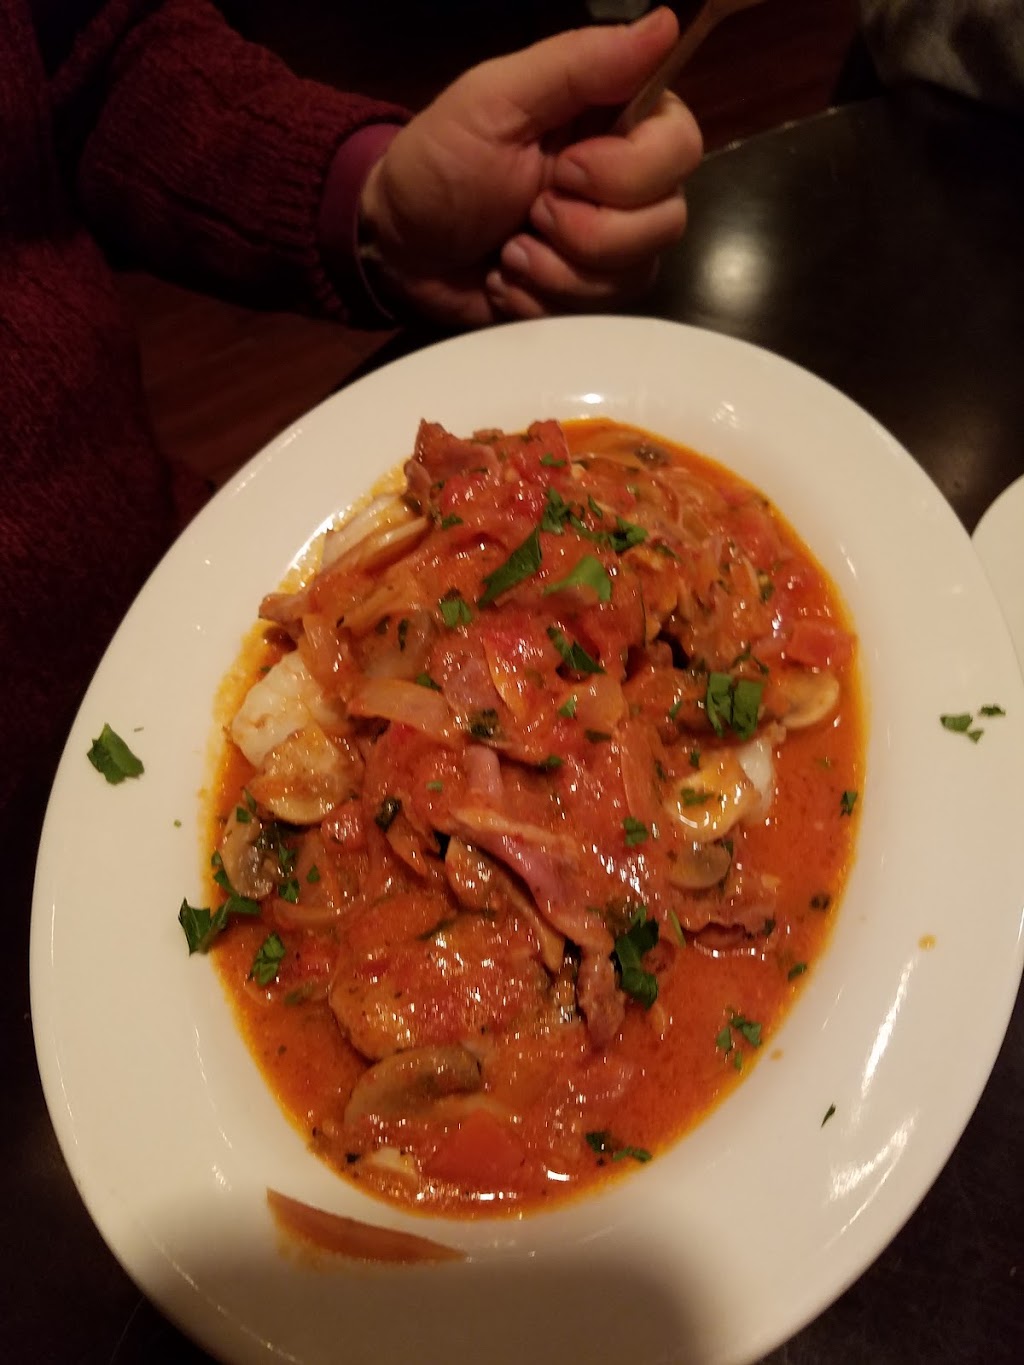 Marios | 422 S Main St, Forked River, NJ 08731 | Phone: (609) 693-4349